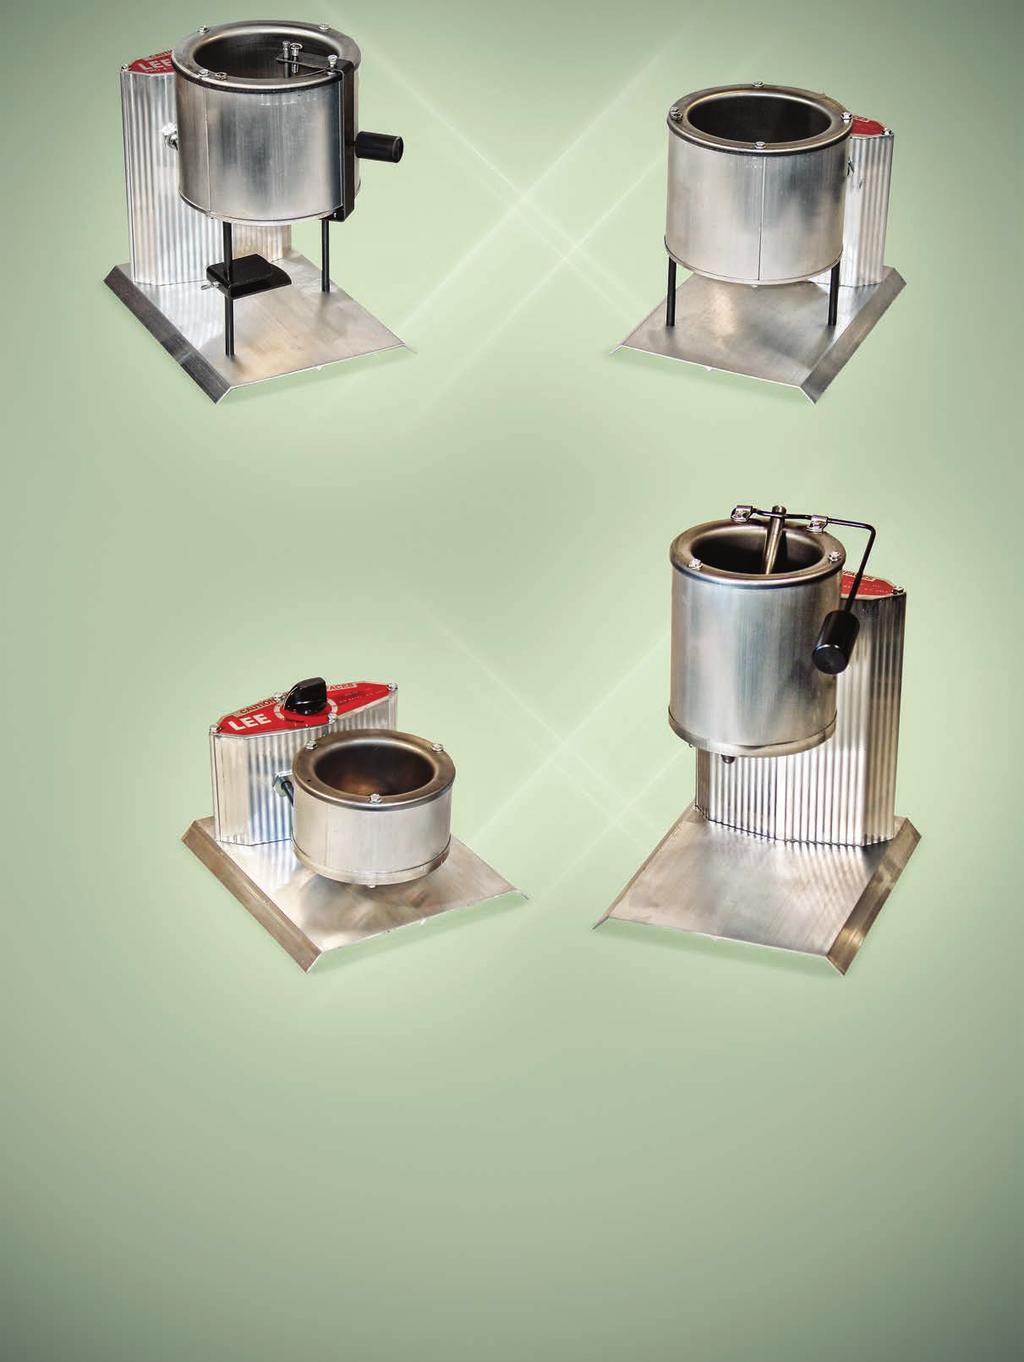 LEE ELECTRIC MELTERS UNIQUE INFINITE HEAT CONTROL A highly reliable control, mounted away from the high heat of the pot. Eliminates failures usually associated with thermostatically controlled units.